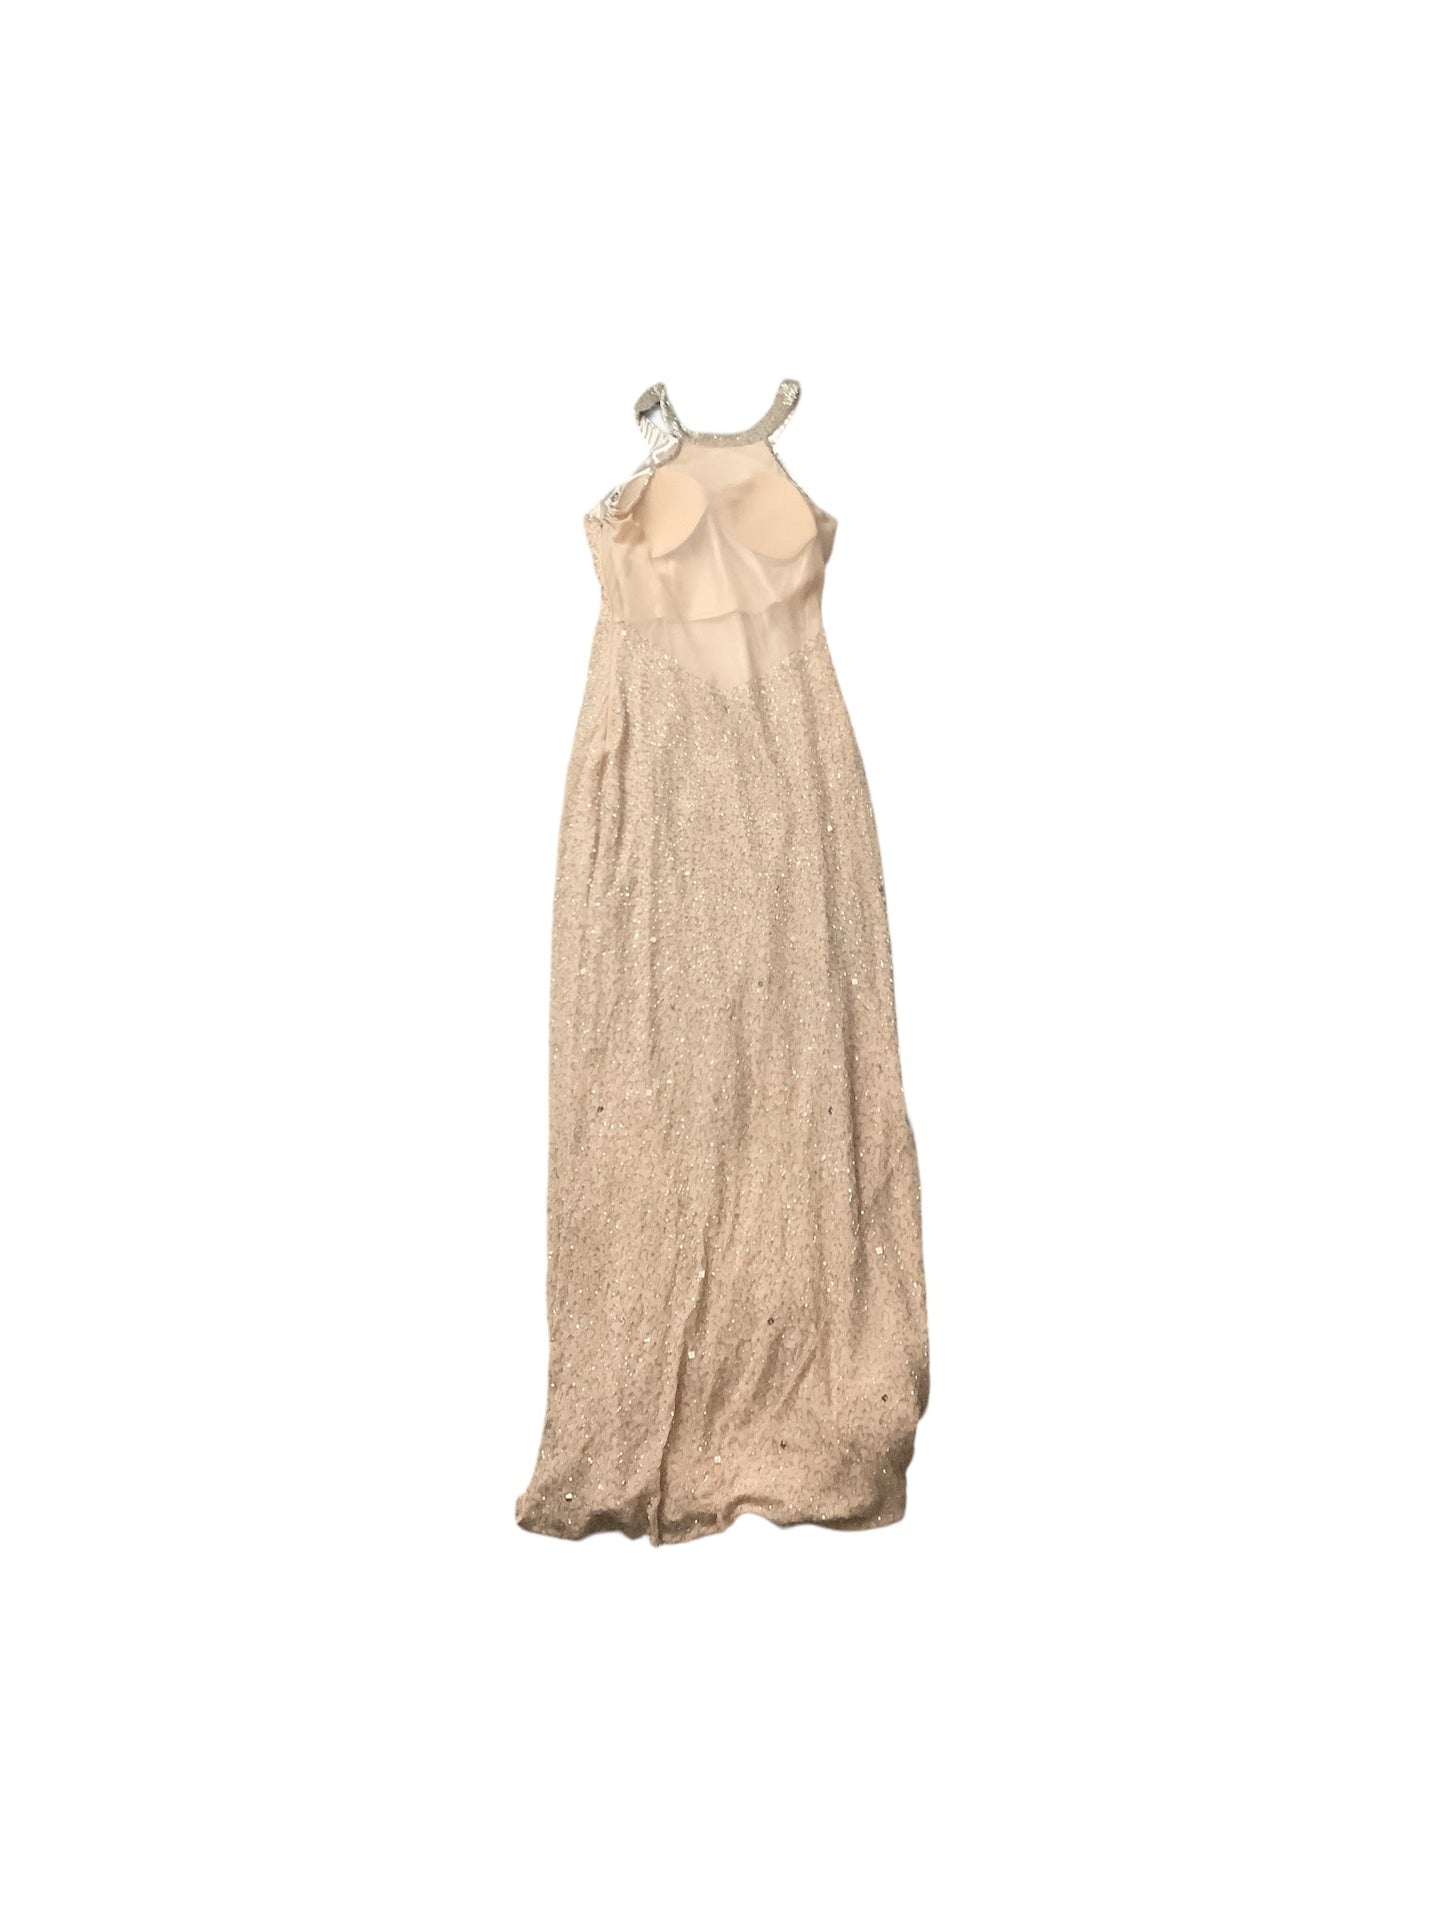 Tan Dress Casual Maxi Adrianna Papell, Size 10